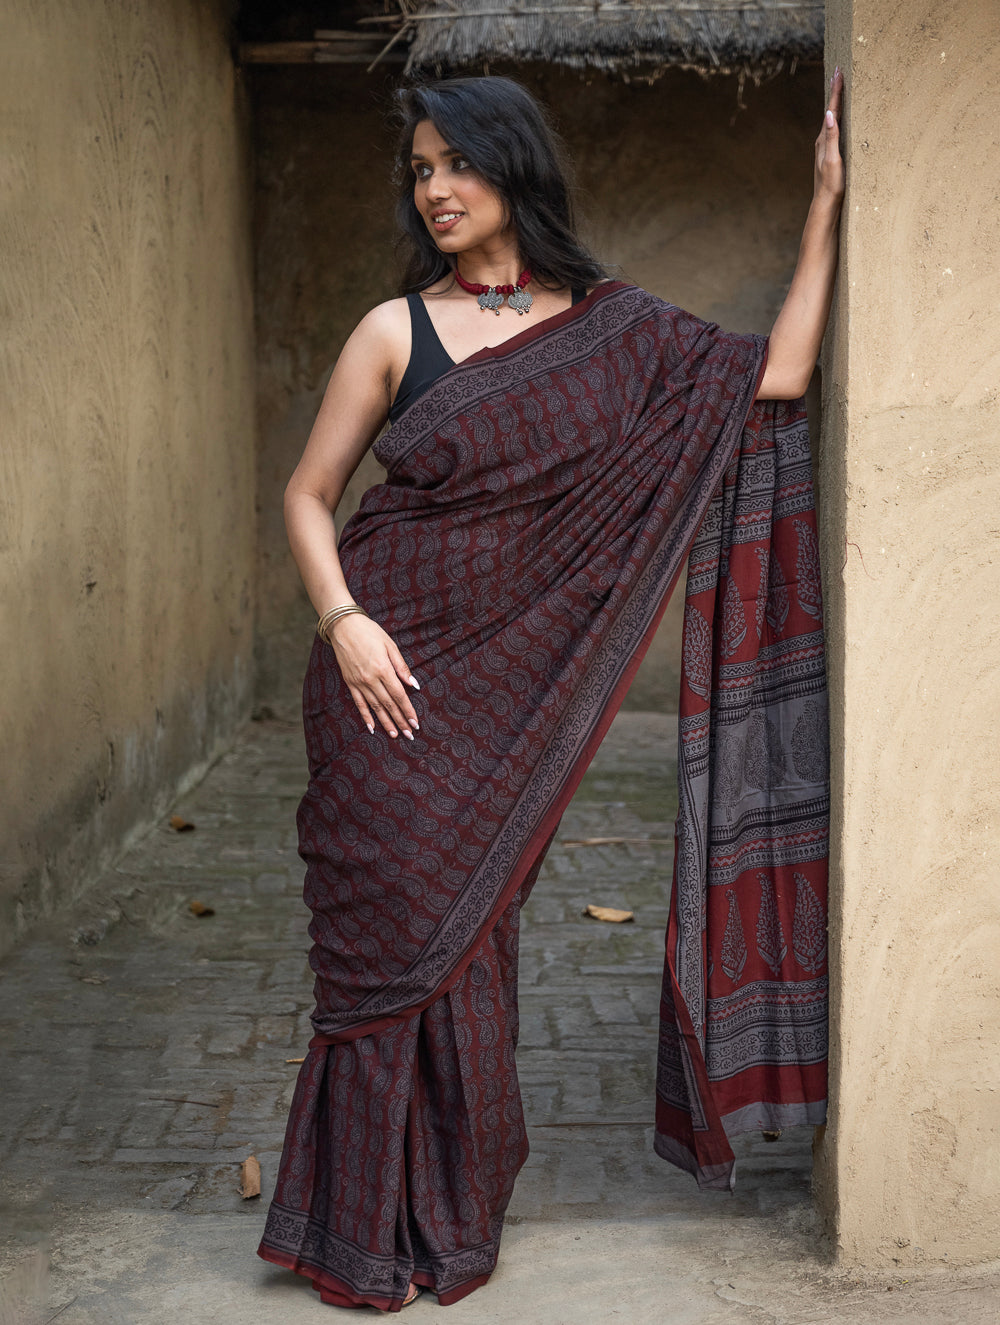 Load image into Gallery viewer, Exclusive Bagh Hand Block Printed Cotton Saree - Royal Paisley